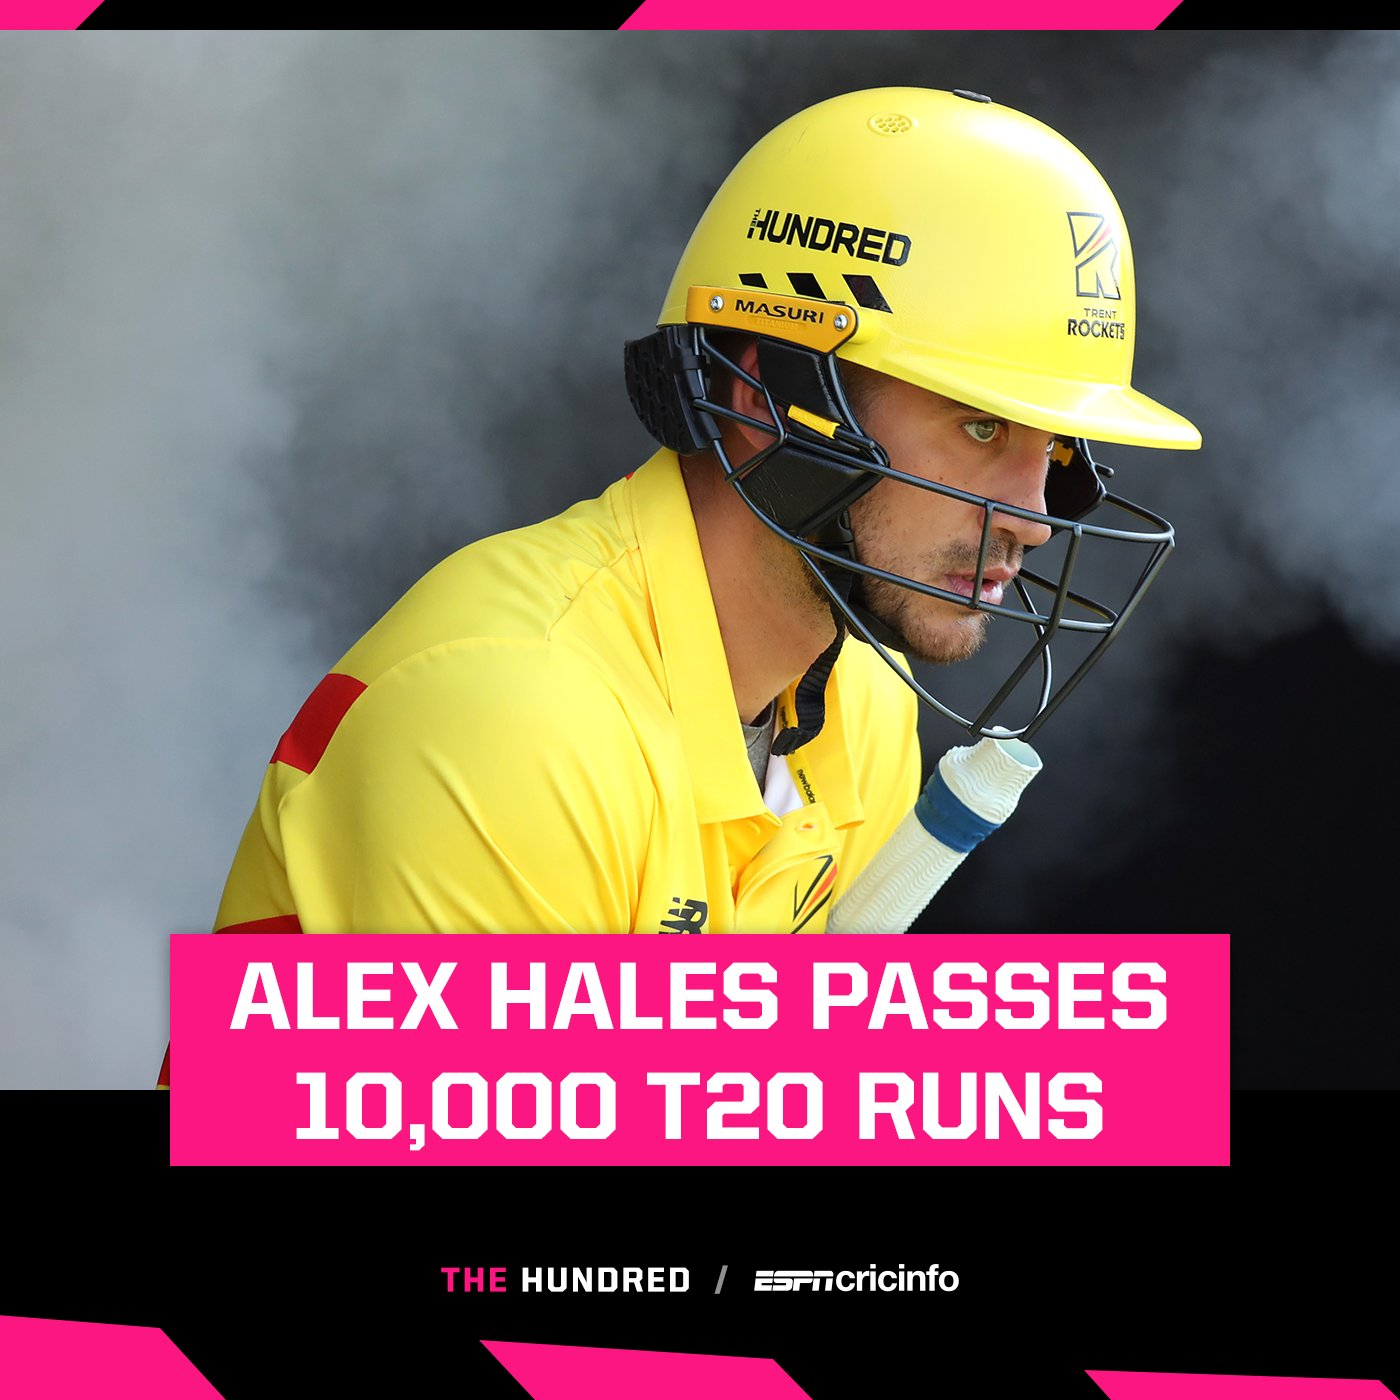 Alex Hales is the first Englishman to breach 10,000-club: With the T20 World Cup around the corner, everyone is busy with building